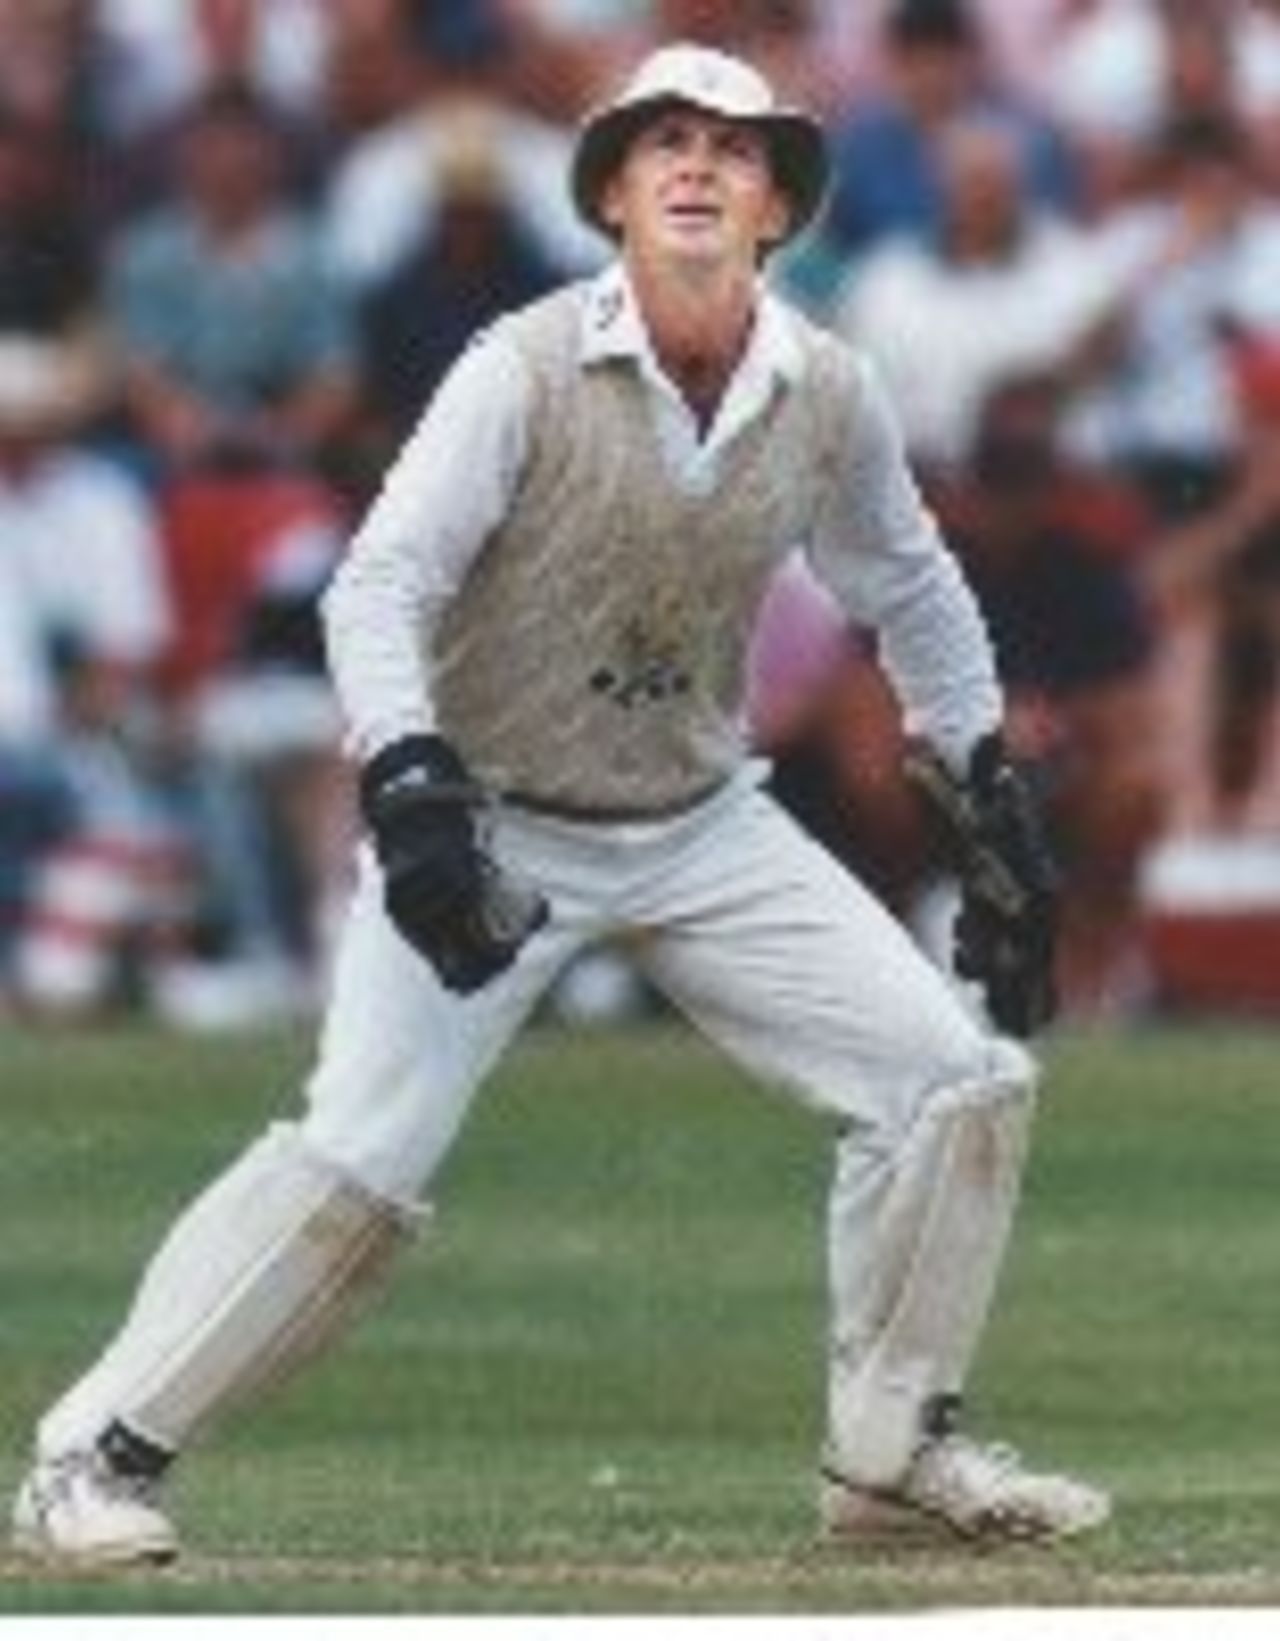 Colin Metson gets ready to gather in a throw during Glamorgan's Nat West Trophy match against Durham at Cardiff in July 1993